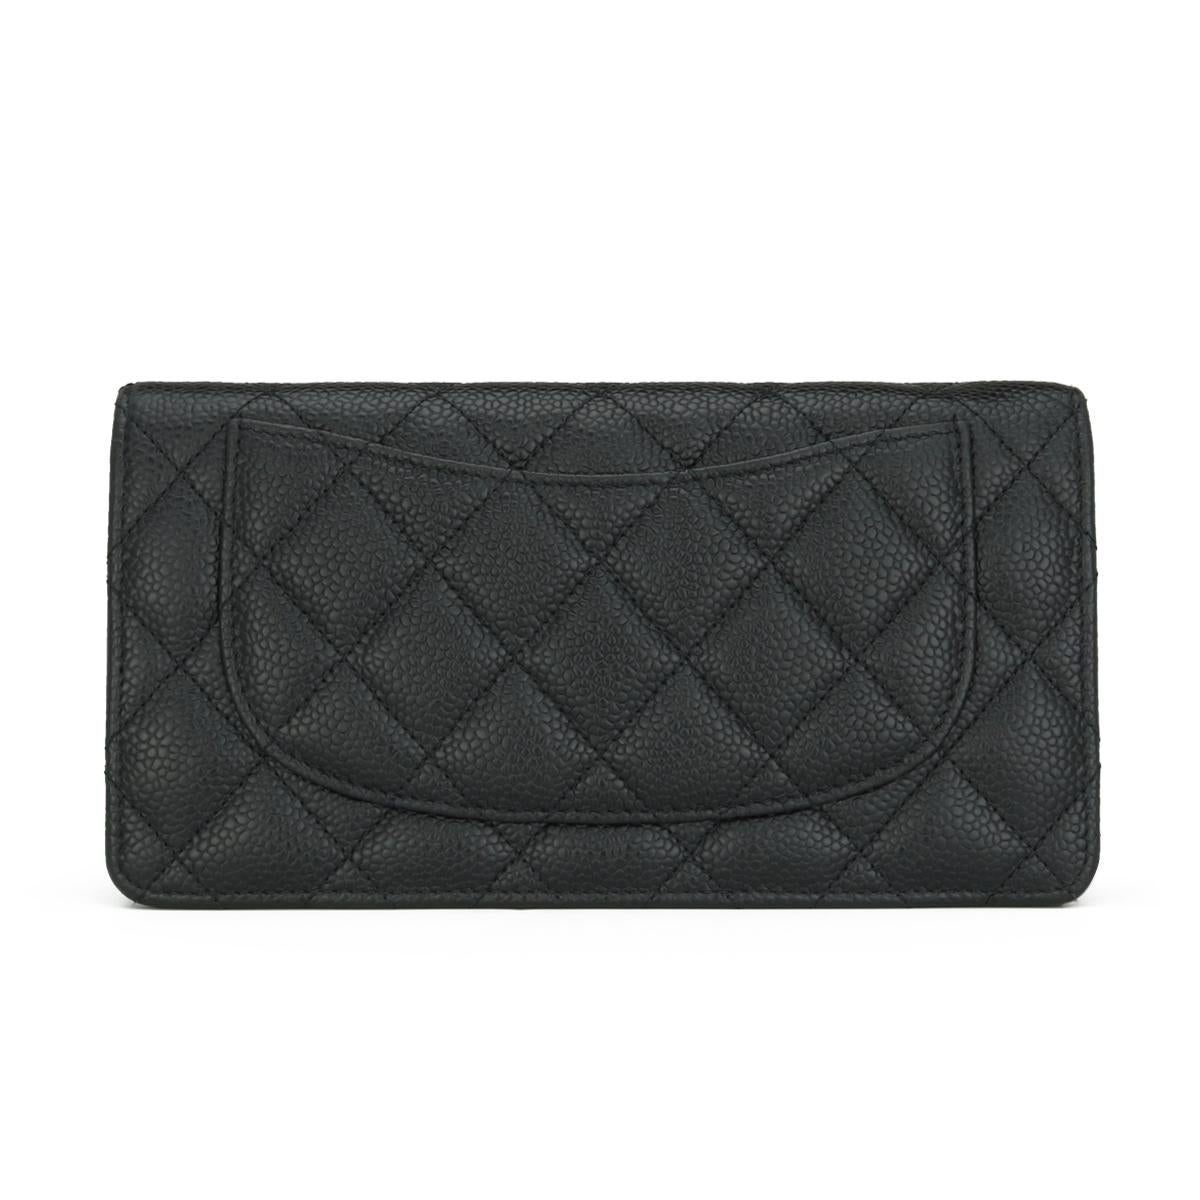 Chanel Quilted Classic Long Flap Yen Wallet in Black Caviar Silver Hardware 2015 In Excellent Condition For Sale In Huddersfield, GB